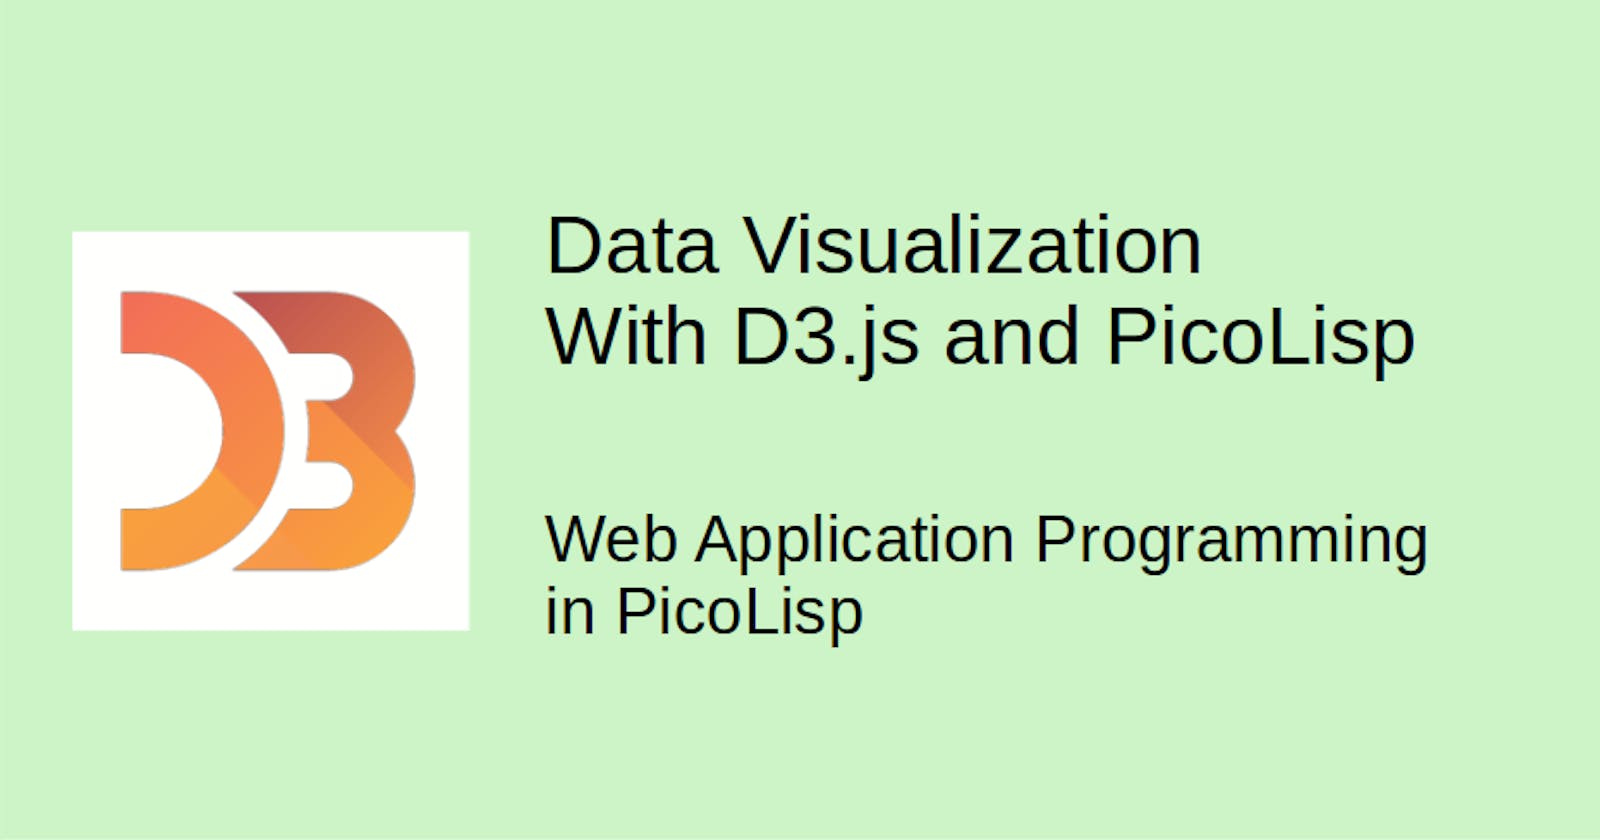 Data Visualization with D3.js and PicoLisp